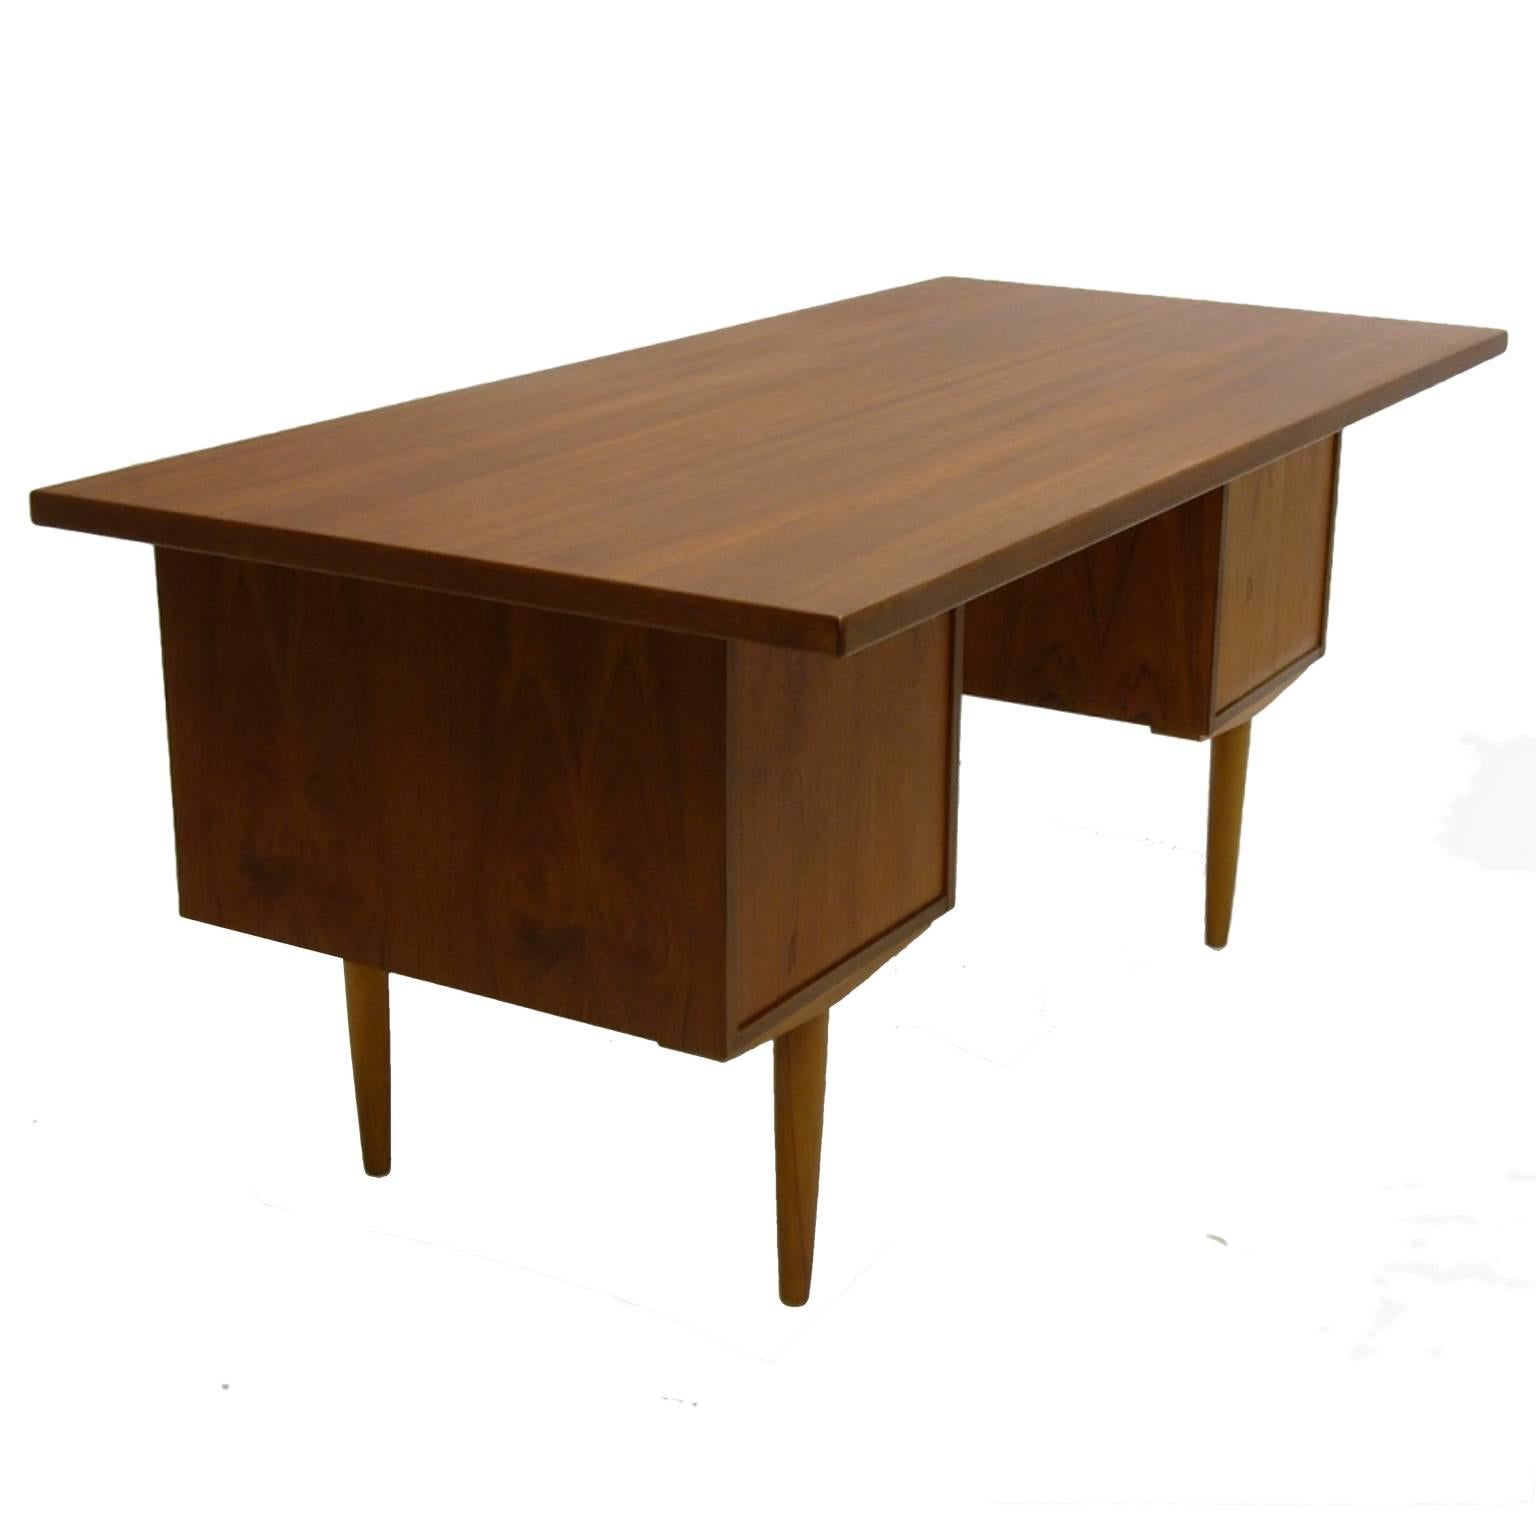 Lovely and functional teak desk. Large desktop area along with three drawers on one side and one large file drawer on the other side.